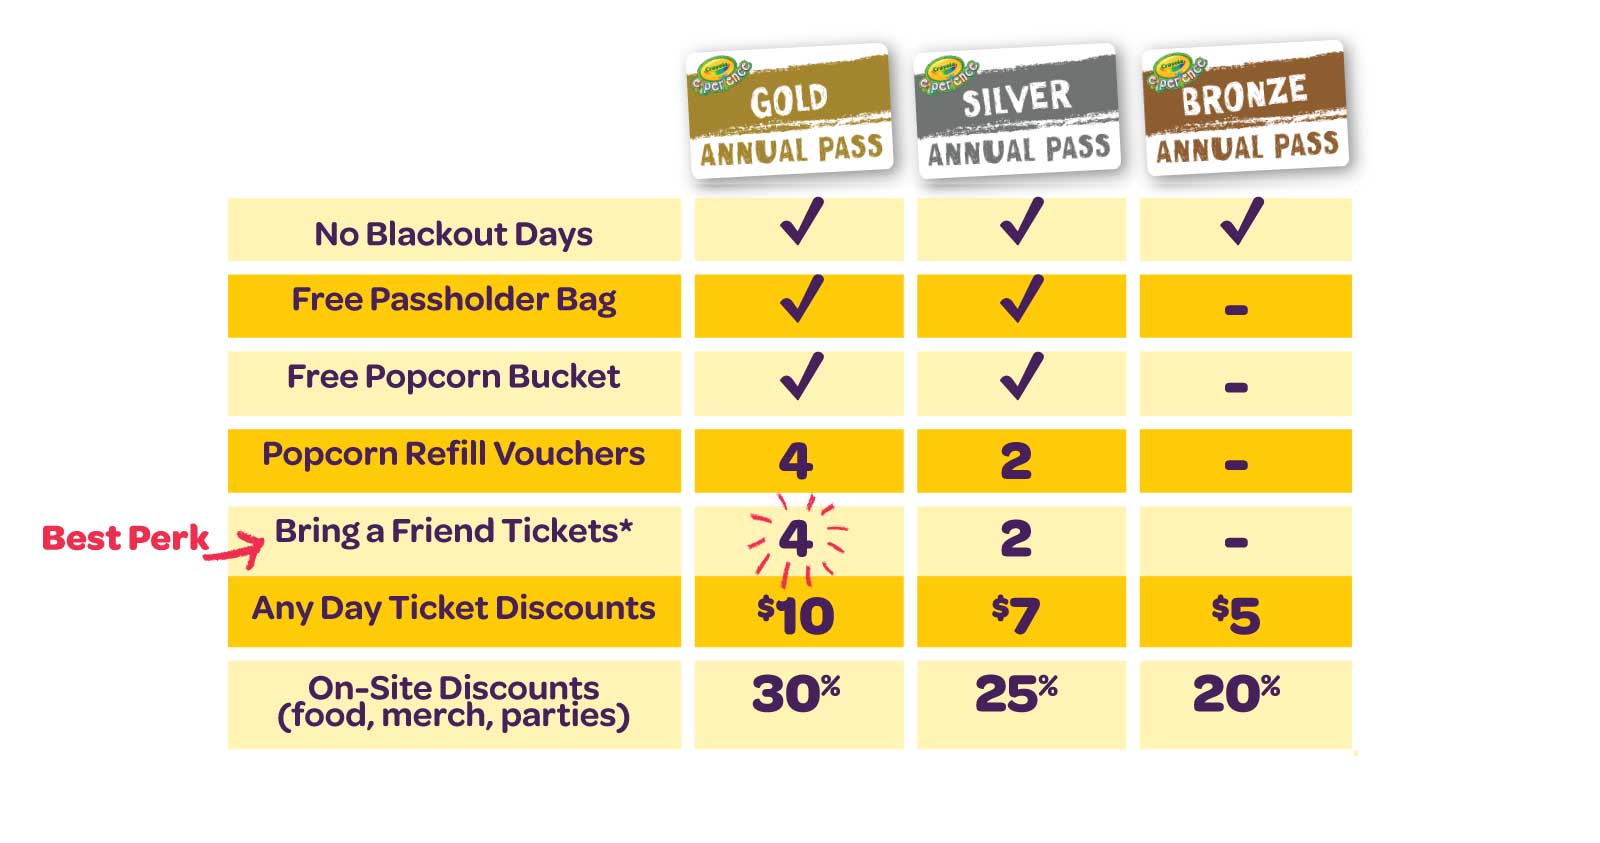 Comparison of Annual Pass Perks